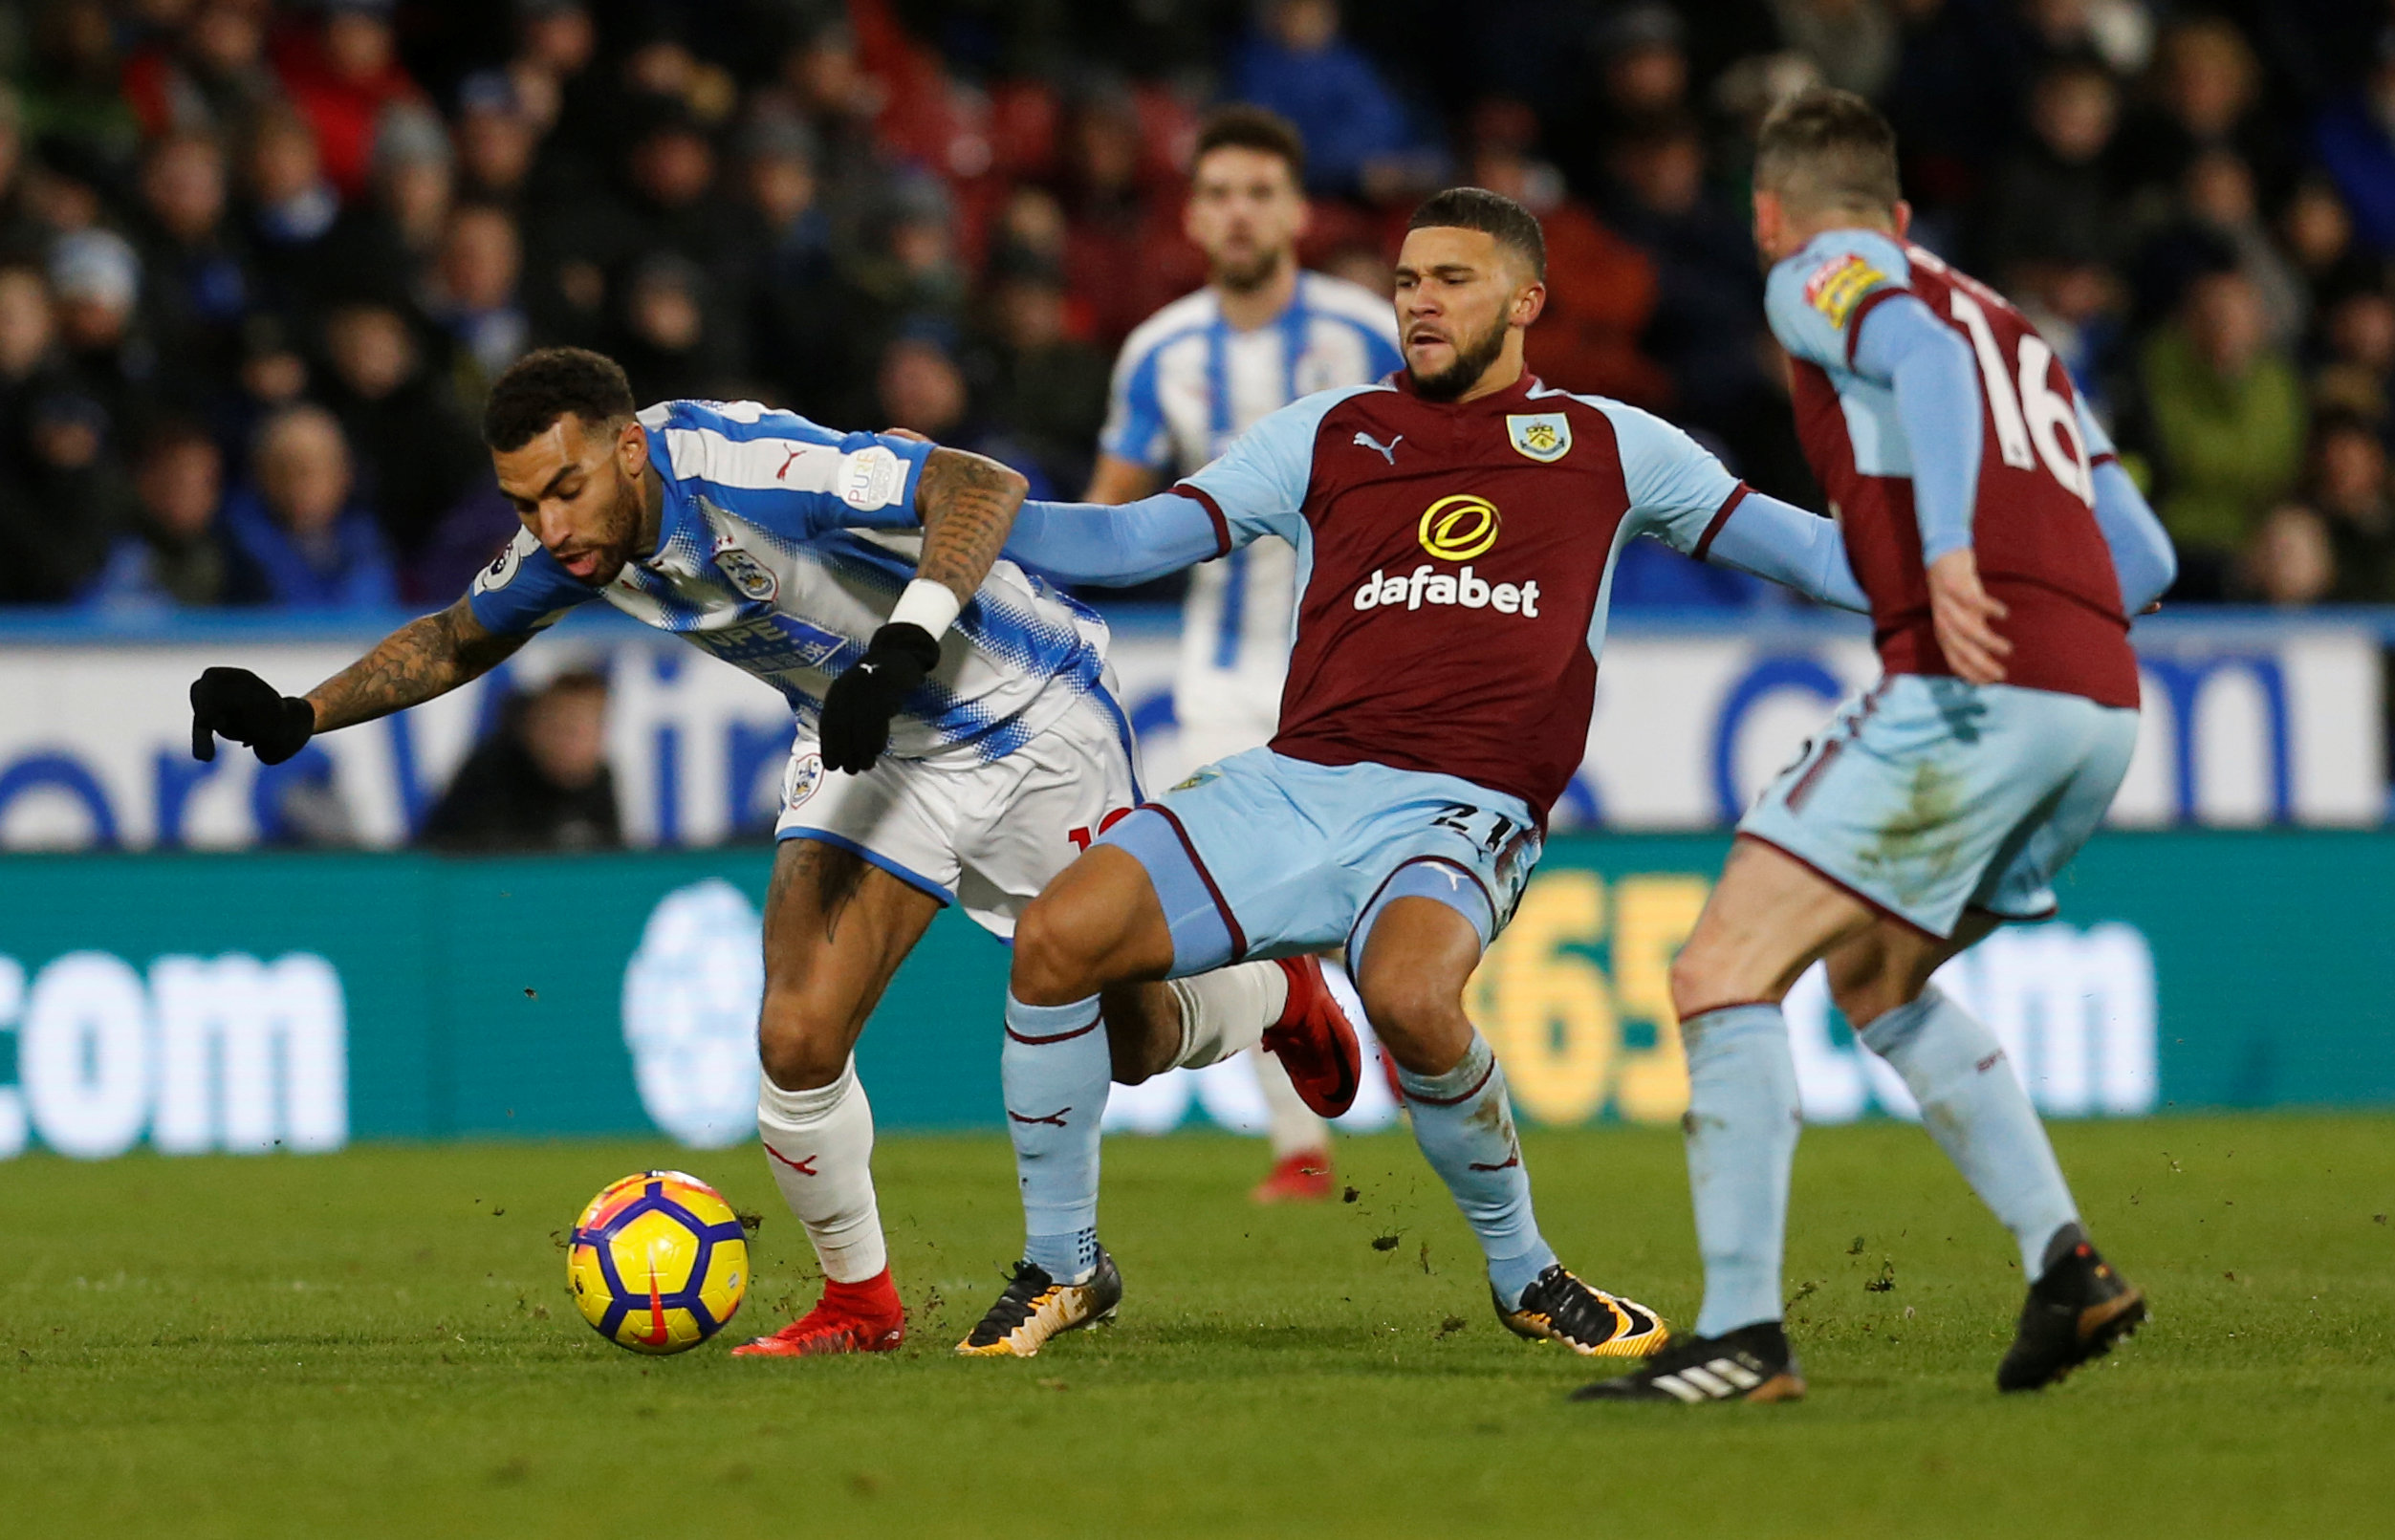 Football: Burnley frustrated in 0-0 draw at Huddersfield